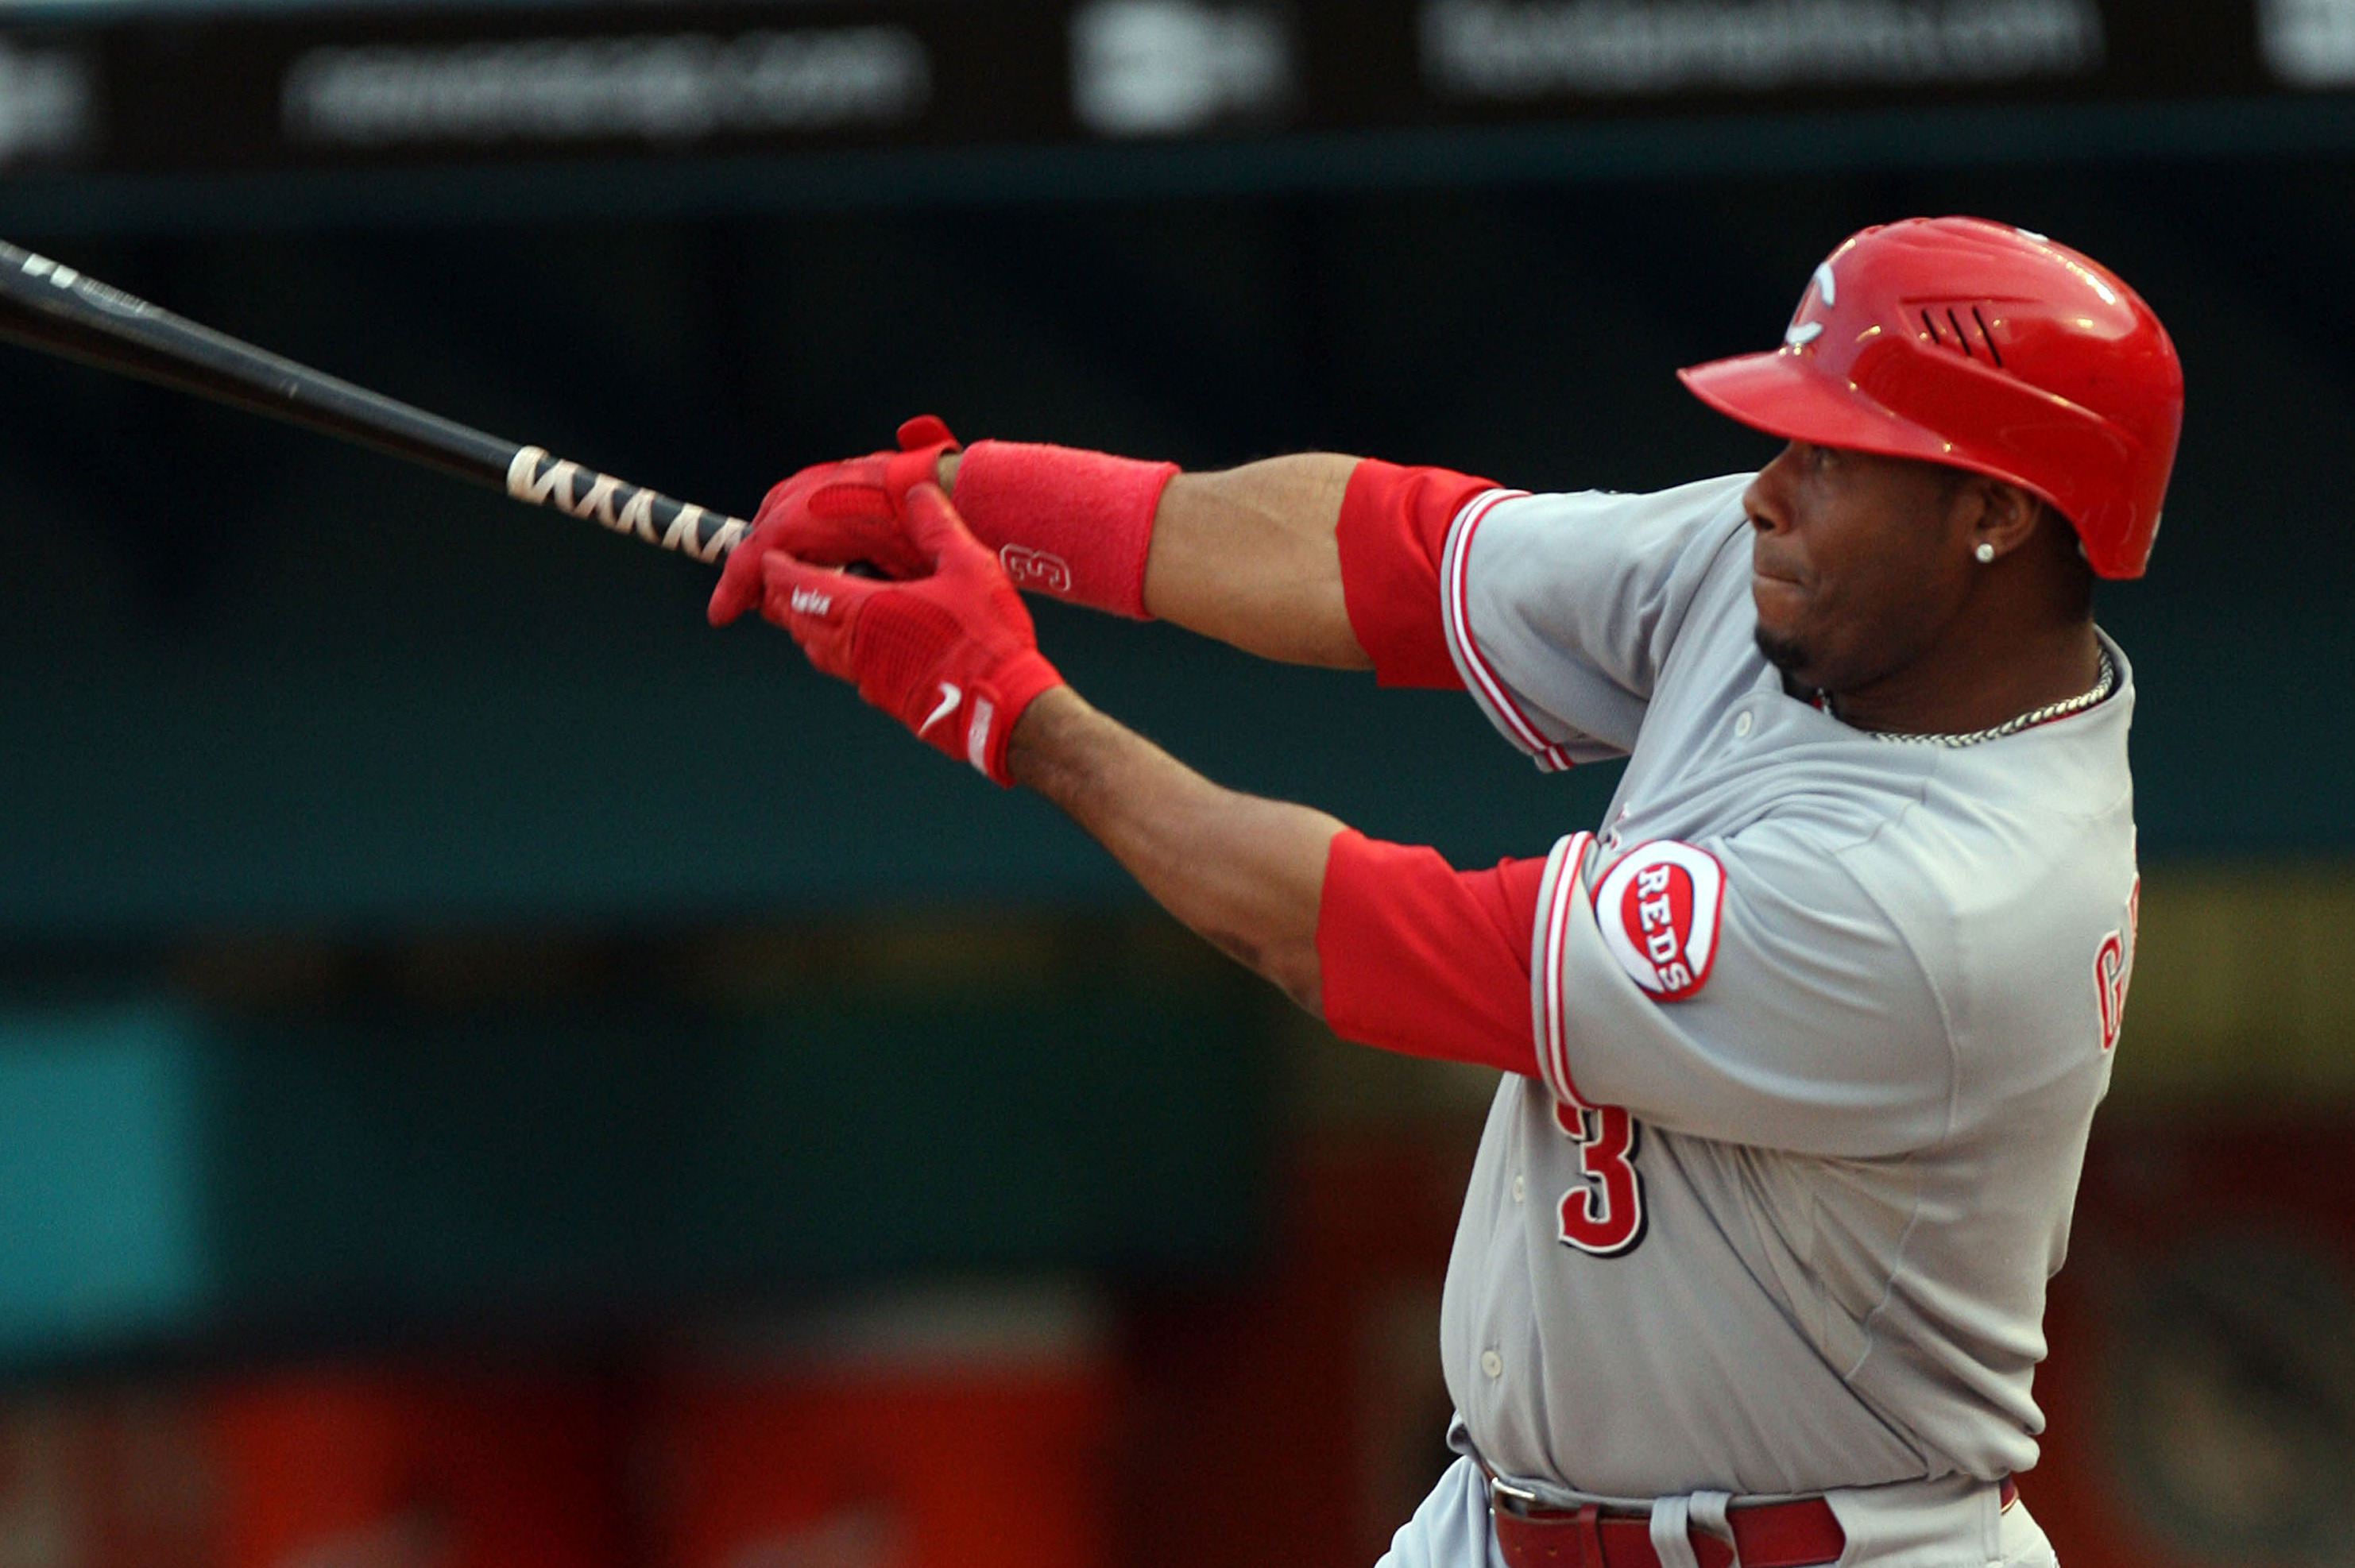 Cincinnati Reds: Why Ken Griffey Jr. May Be the Biggest Mystery